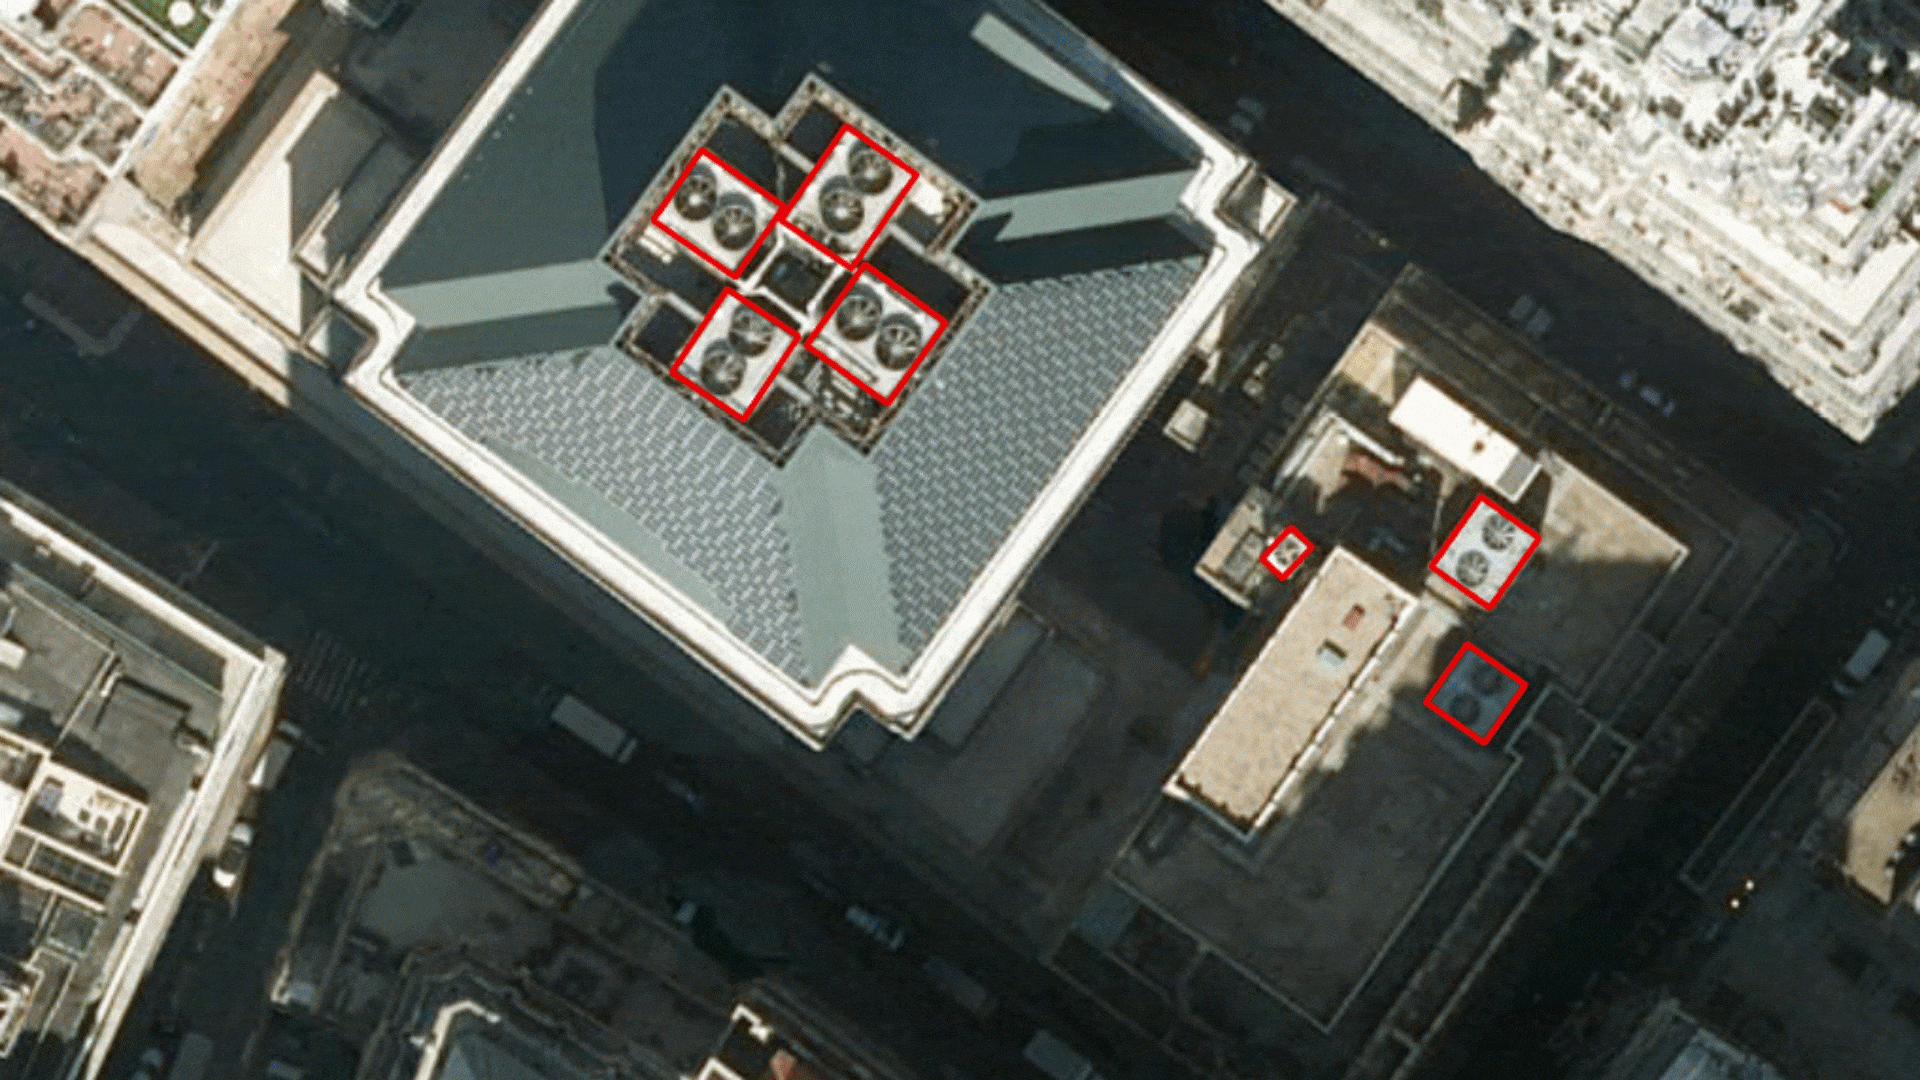 Cooling Tower Detection using High Resolution (4-15 centimeters) Imagery